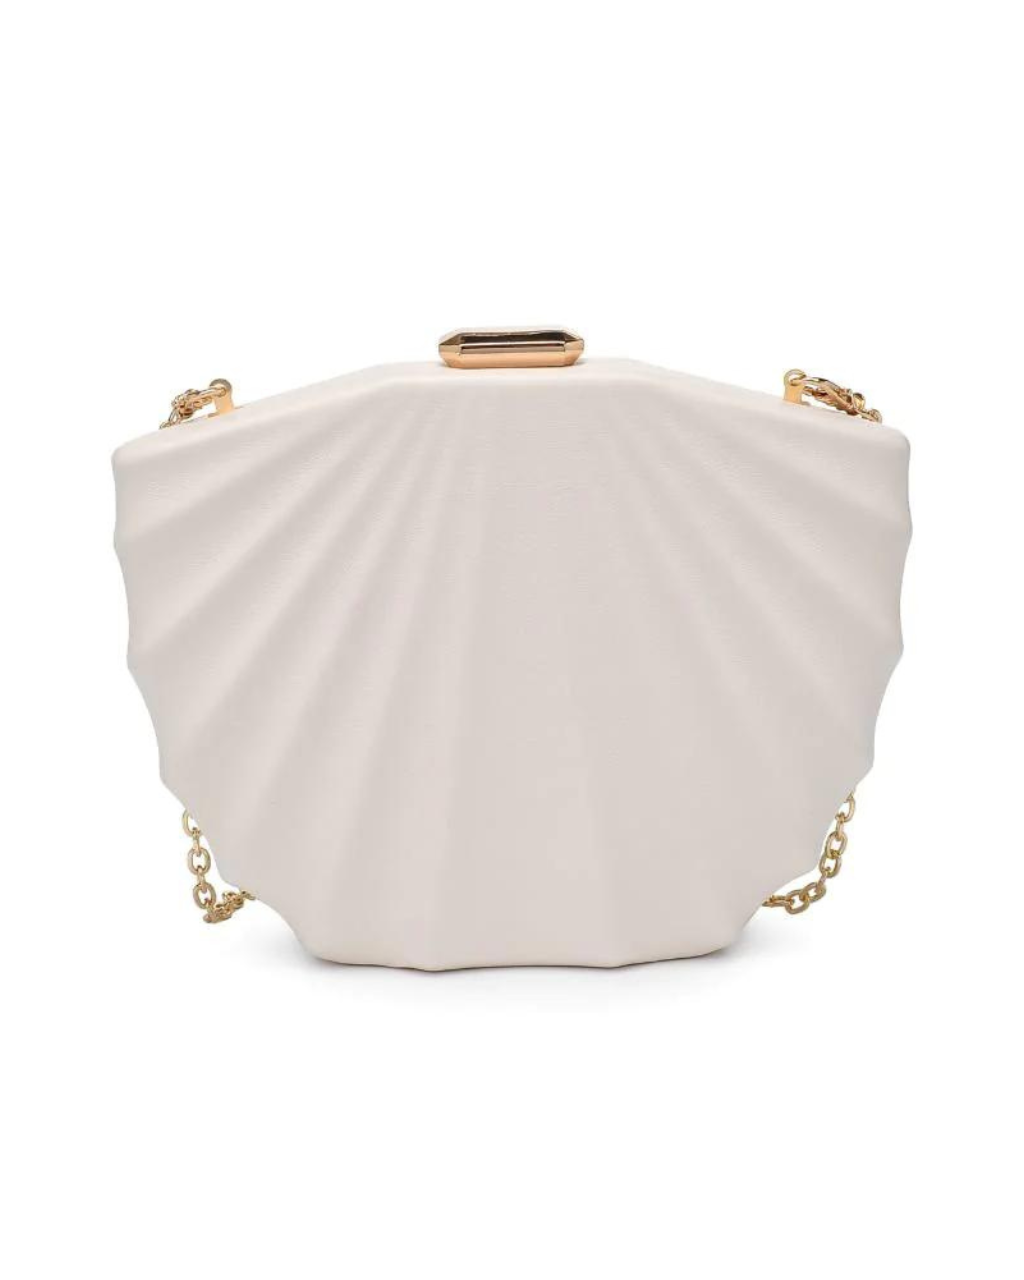 Oceane Crossbody Ivory, Daytime Bag by Urban Expressions | LIT Boutique